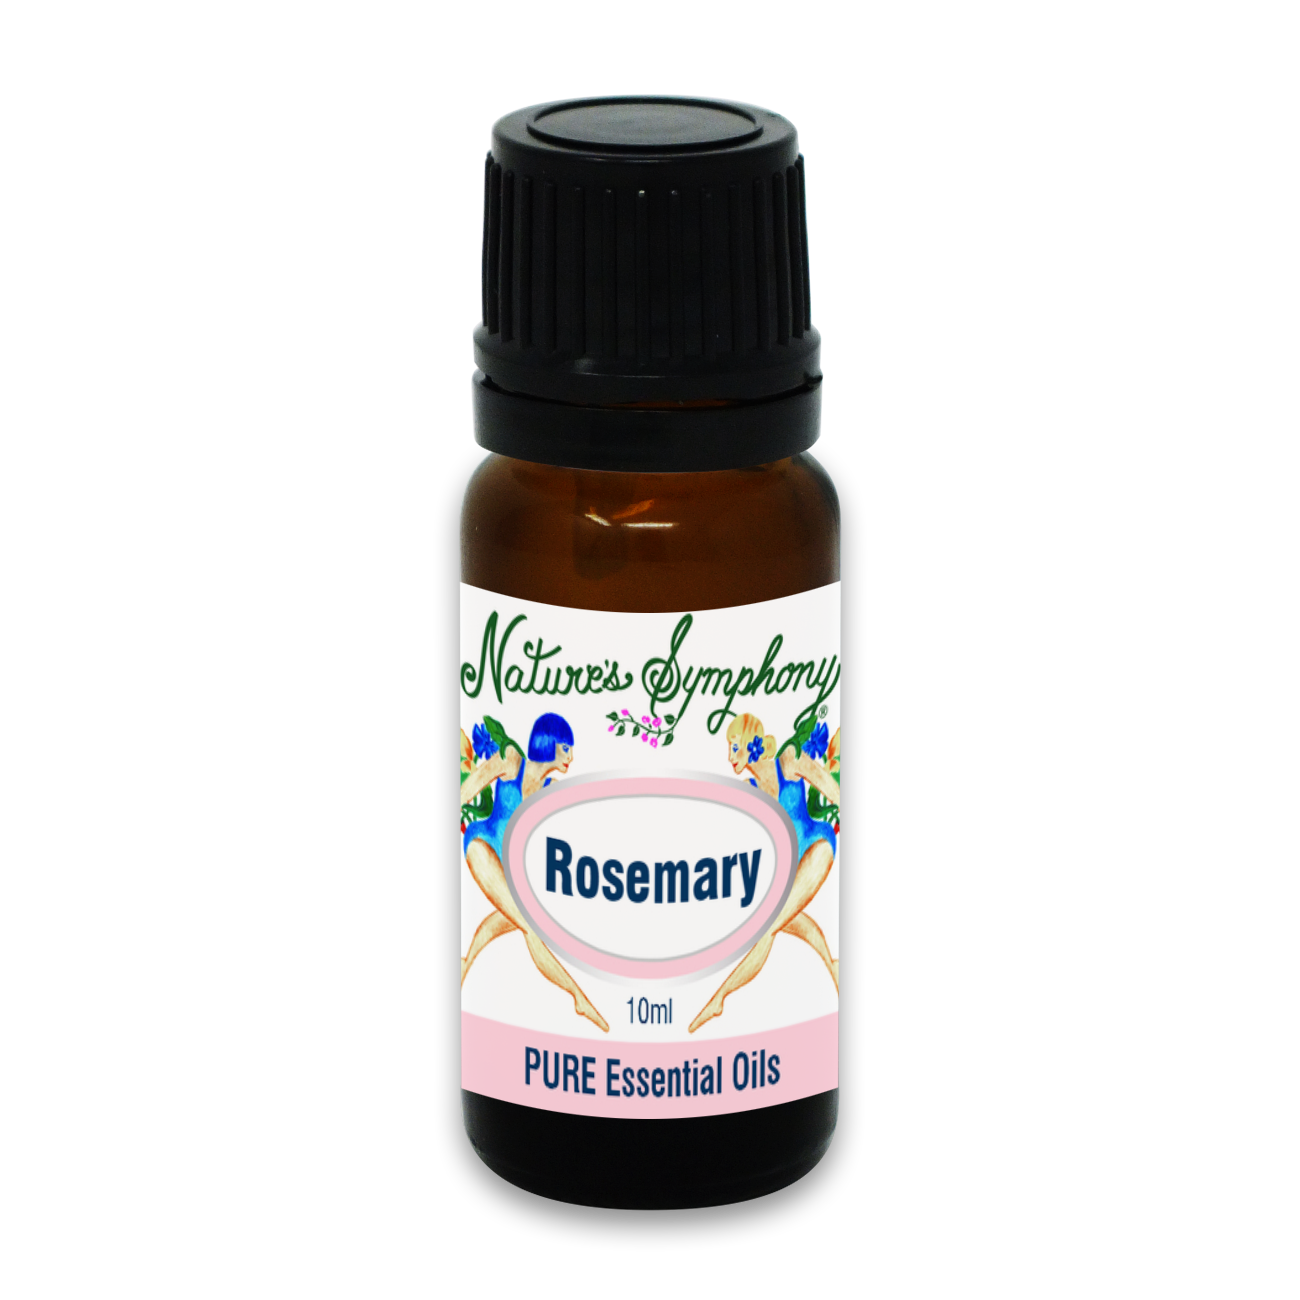 Rosemary, Ambiance Diffusion oil - 10ml